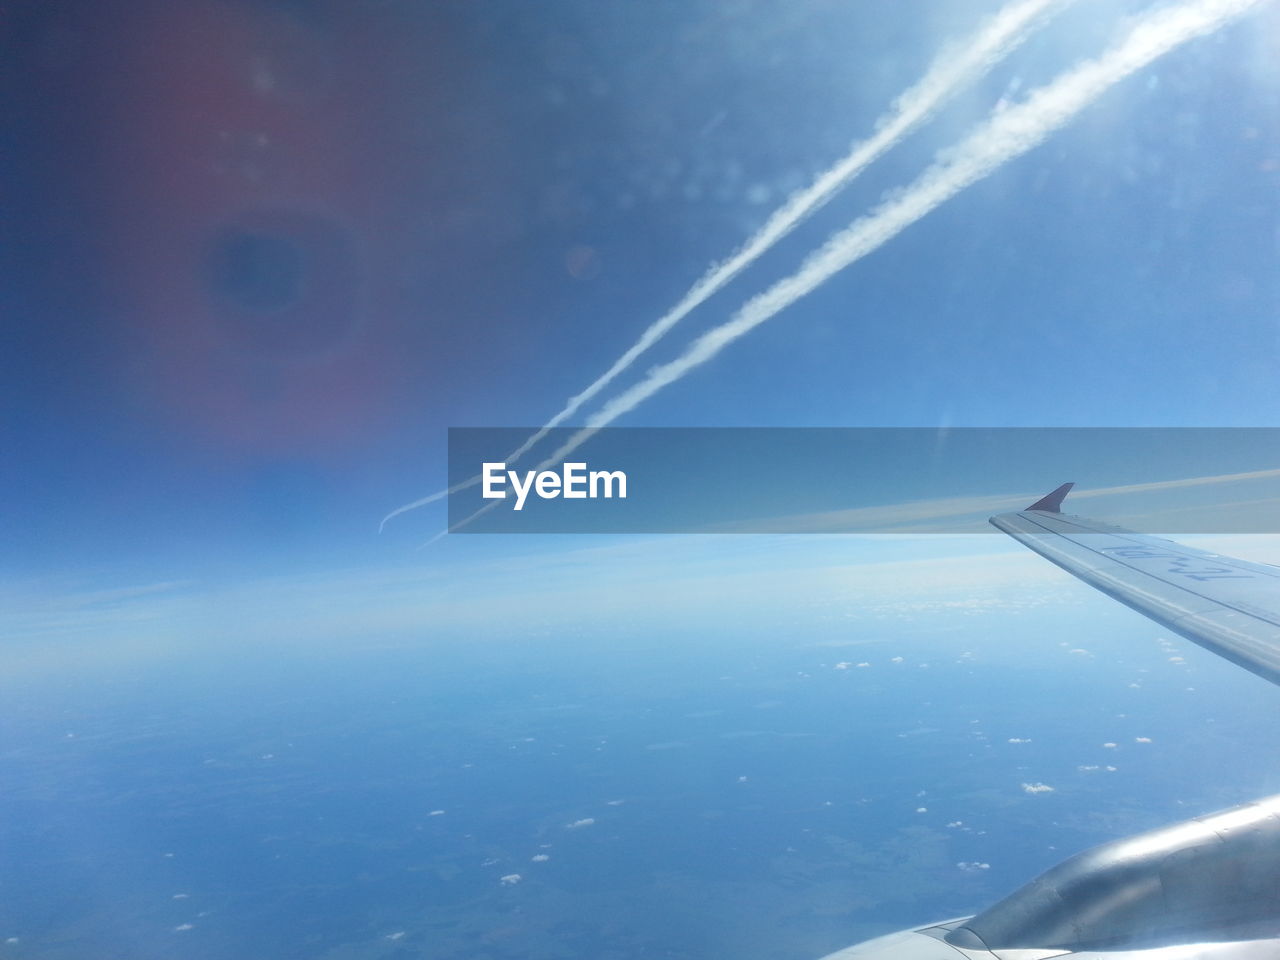 CROPPED IMAGE OF AIRPLANE OVER SEA